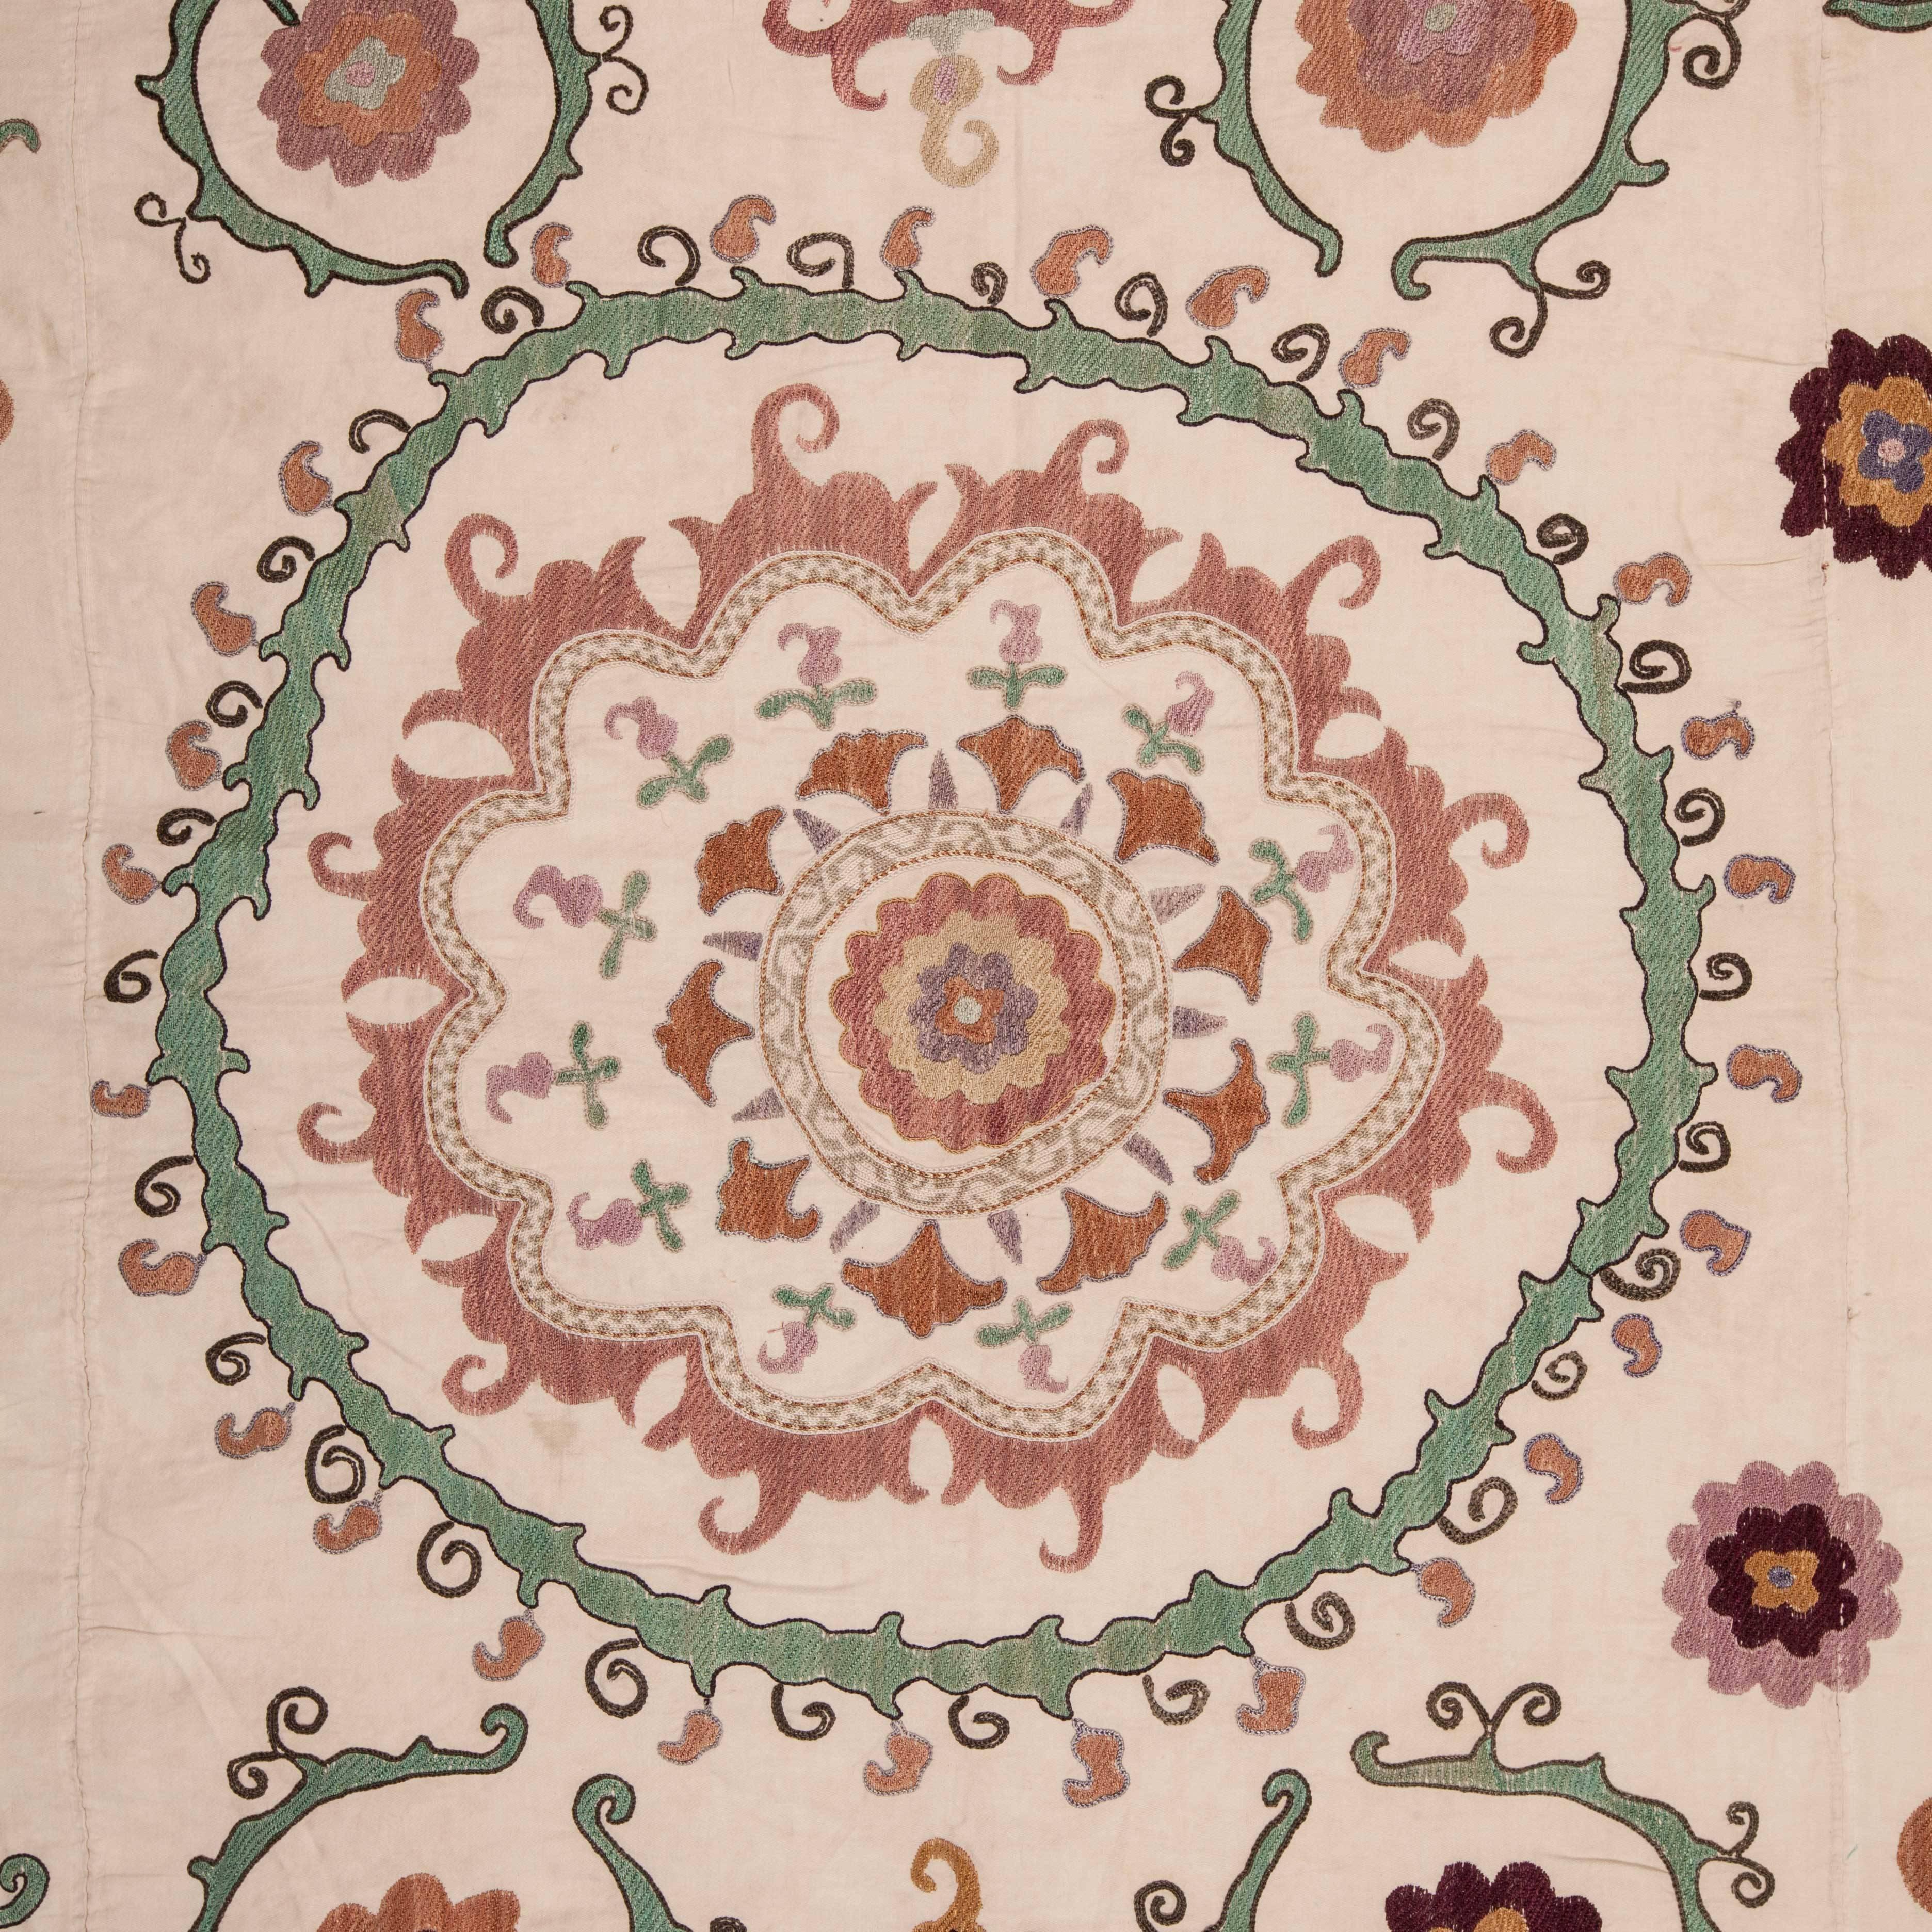 Suzani has soft colors and in fairly good condition.

‘Suzani’ meaning ‘needle’ so ‘needle work ‘ in Persian, refgers to a group of embroideries mainly done in Central Asia, in countries such as , Uzbekistan, Tajikistan. Suzanies in todays textile